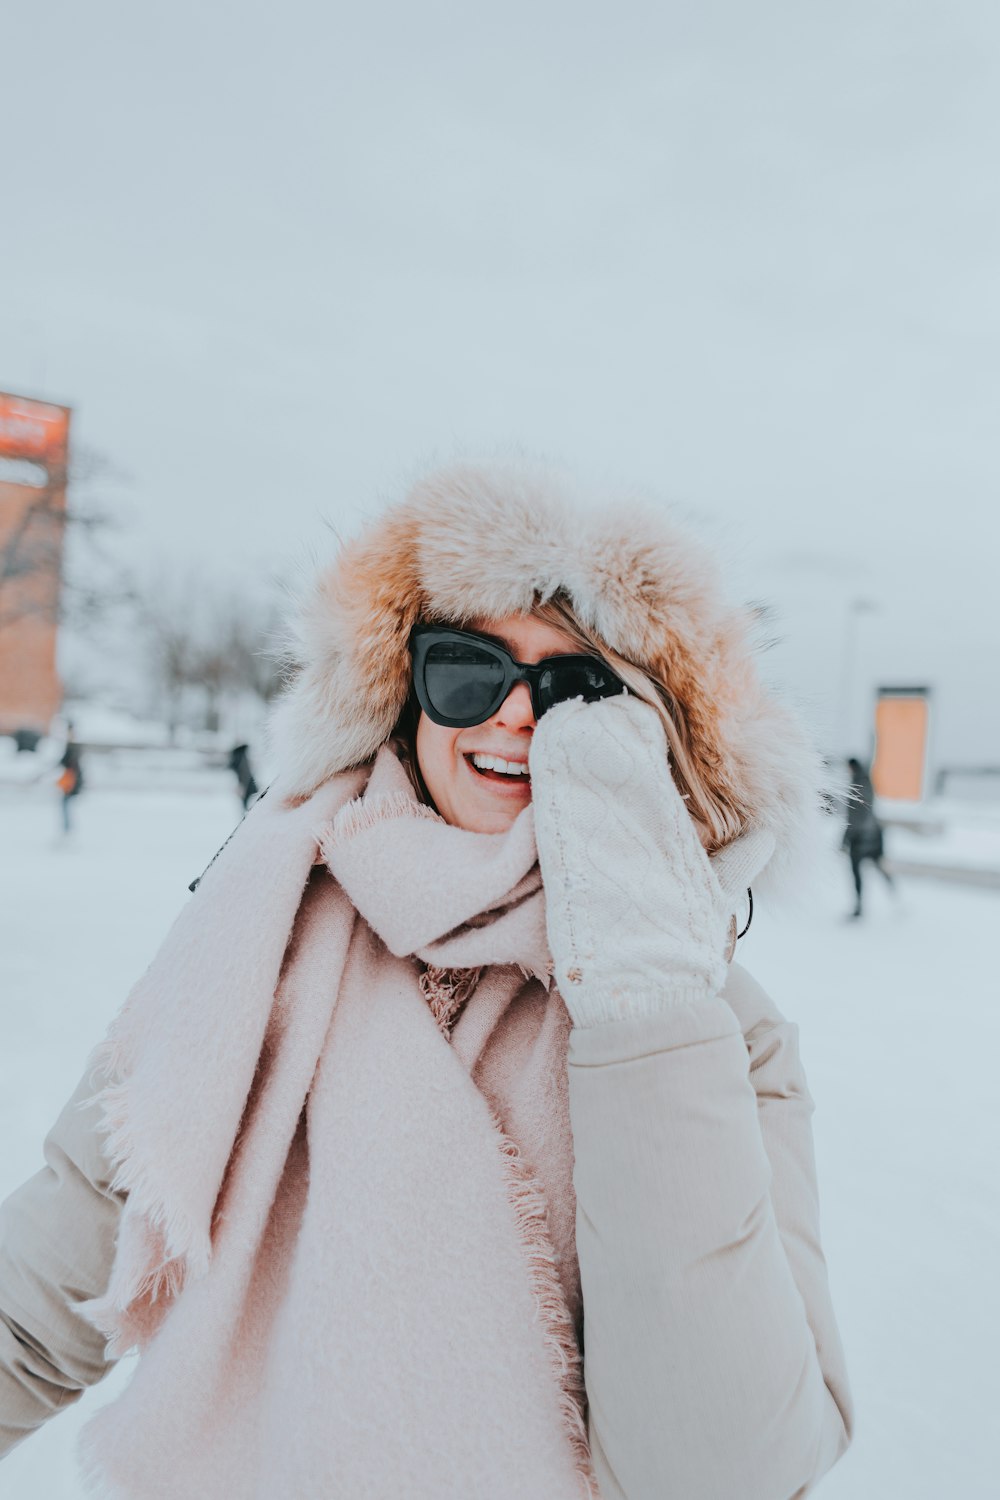 a woman wearing sunglasses and a pink coat in the snow